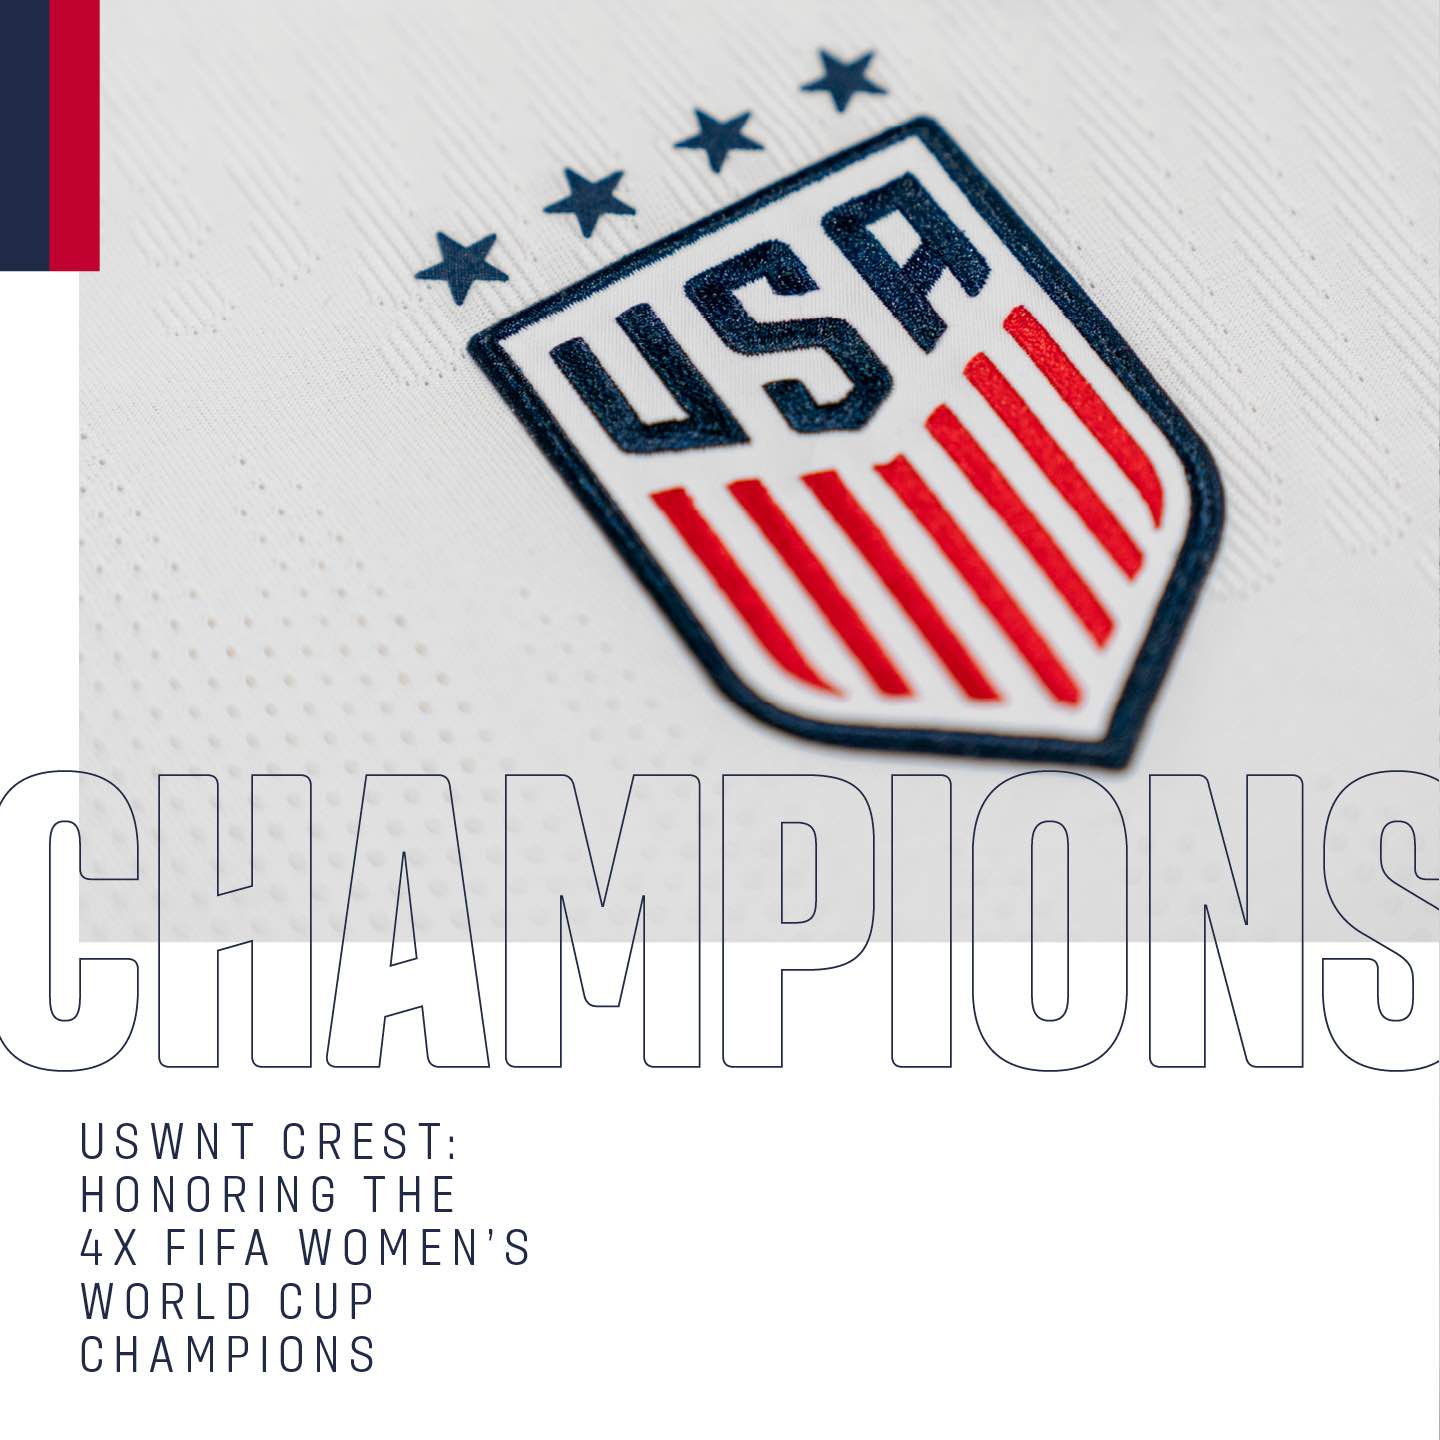 Uswnt Usmnt Jersey Launch Nike Soccer Uniforms Home Away